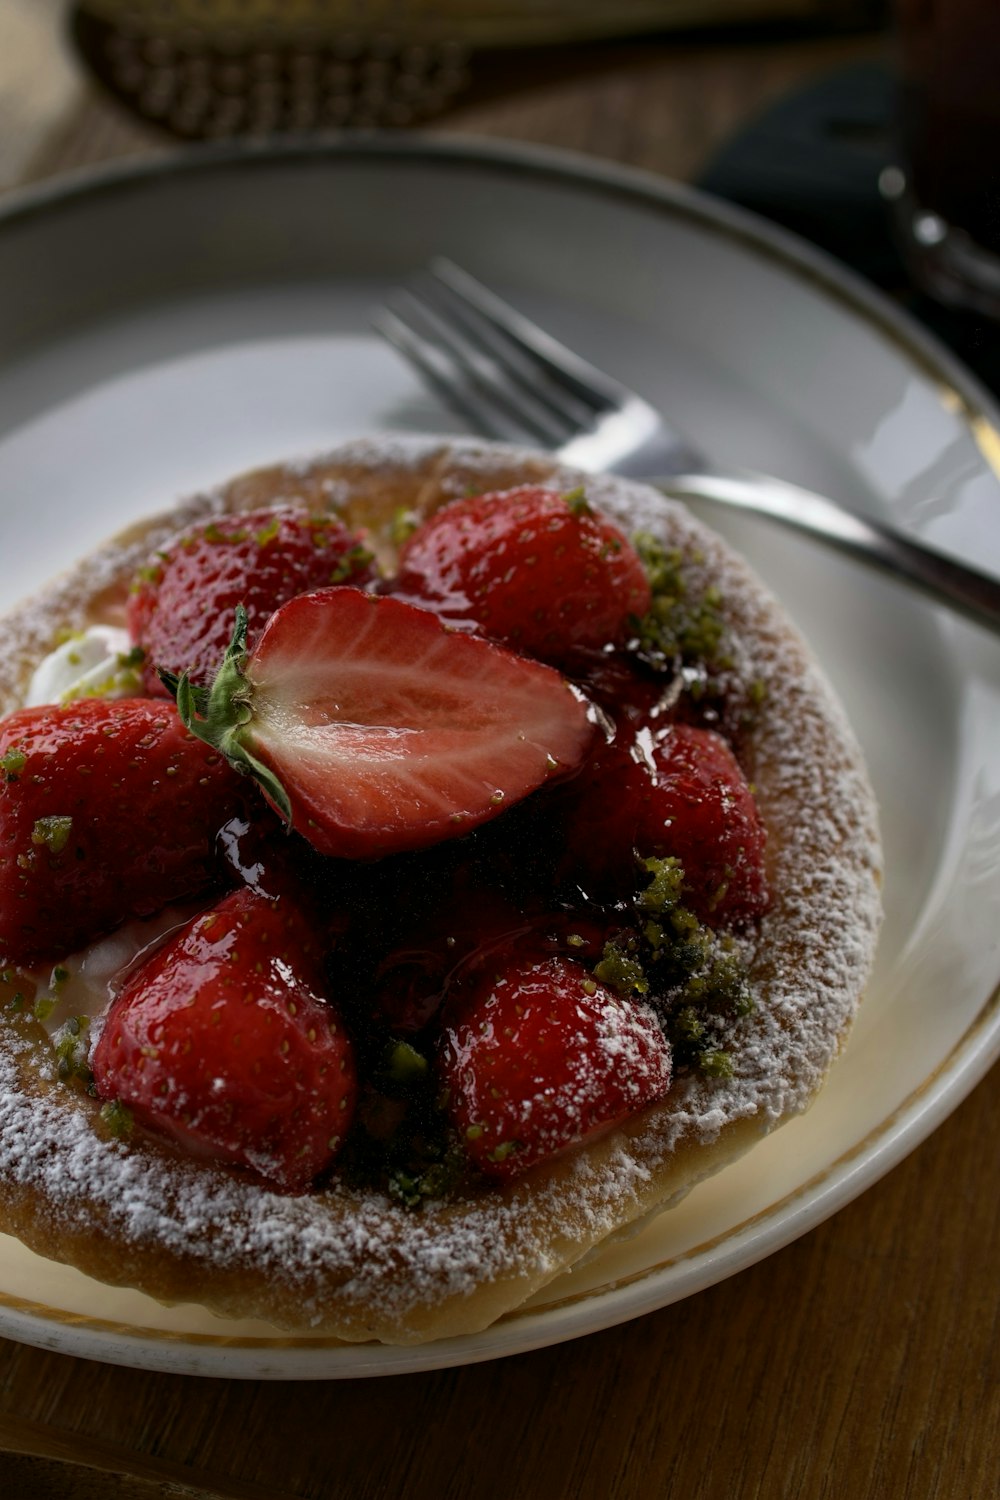 a white plate topped with a pastry covered in powdered sugar and sliced strawberries